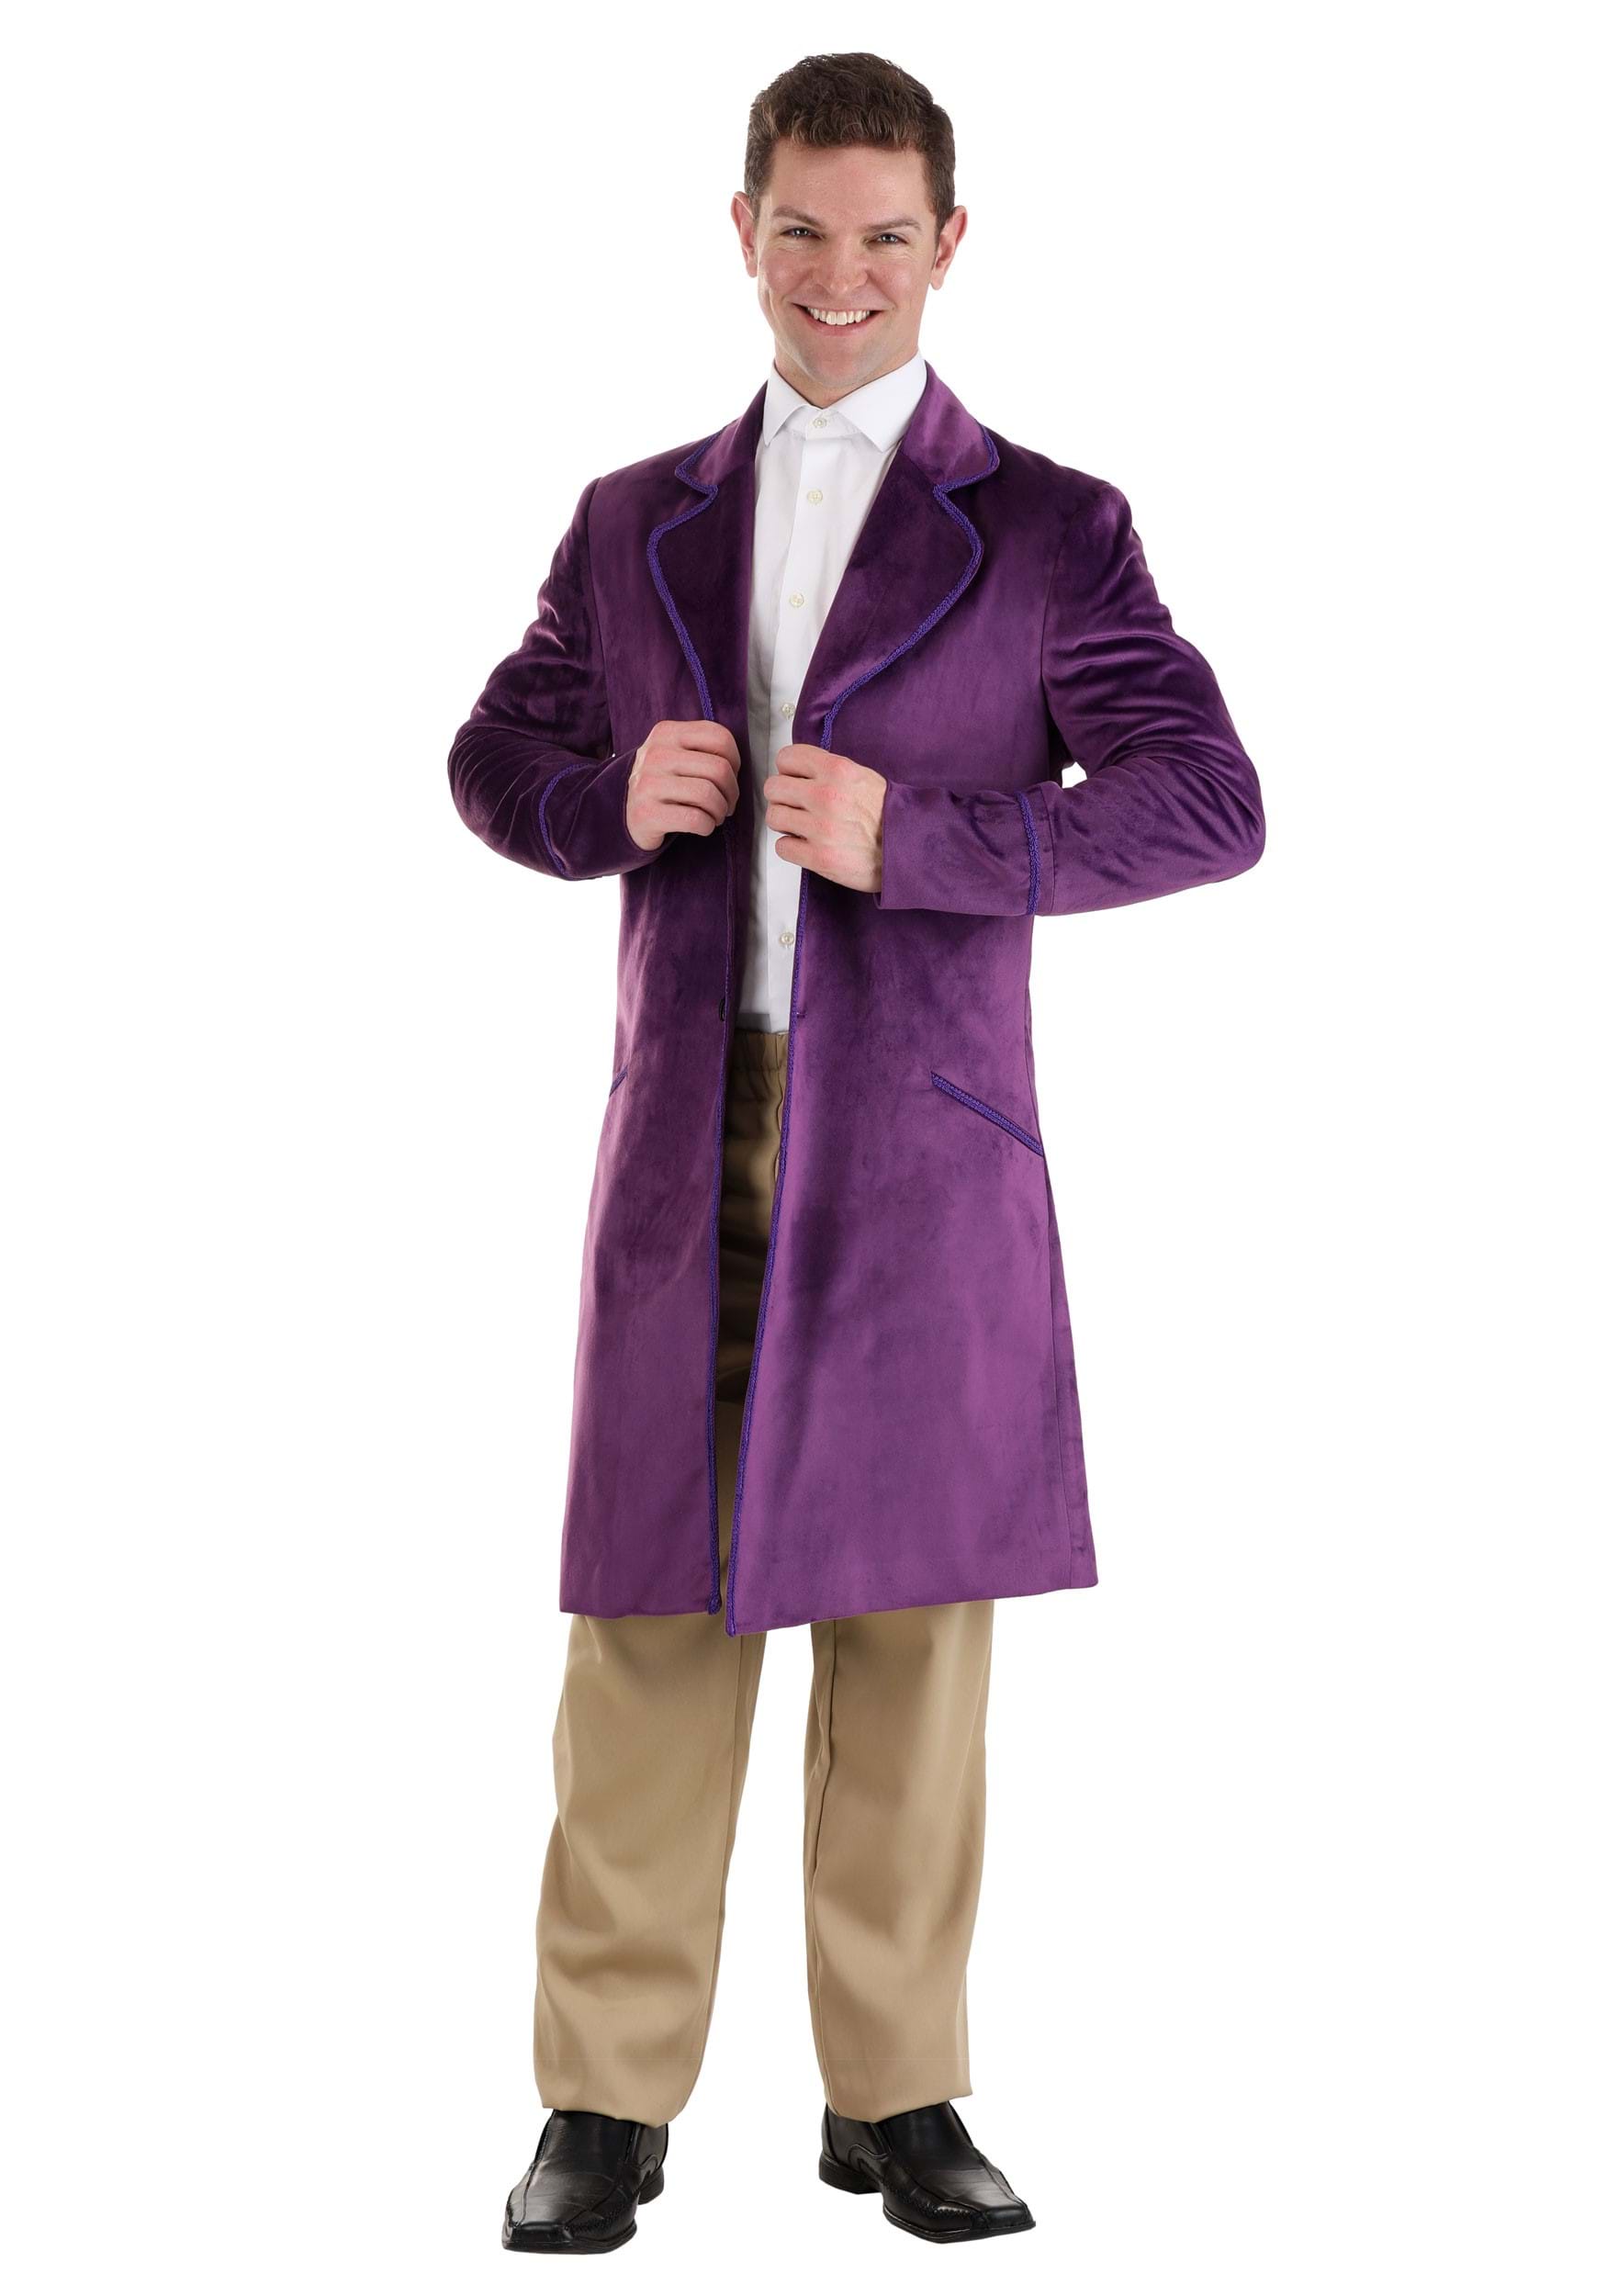 Image of Authentic Willy Wonka Costume Jacket for Men | Willy Wonka Costumes ID FUN1986AD-40